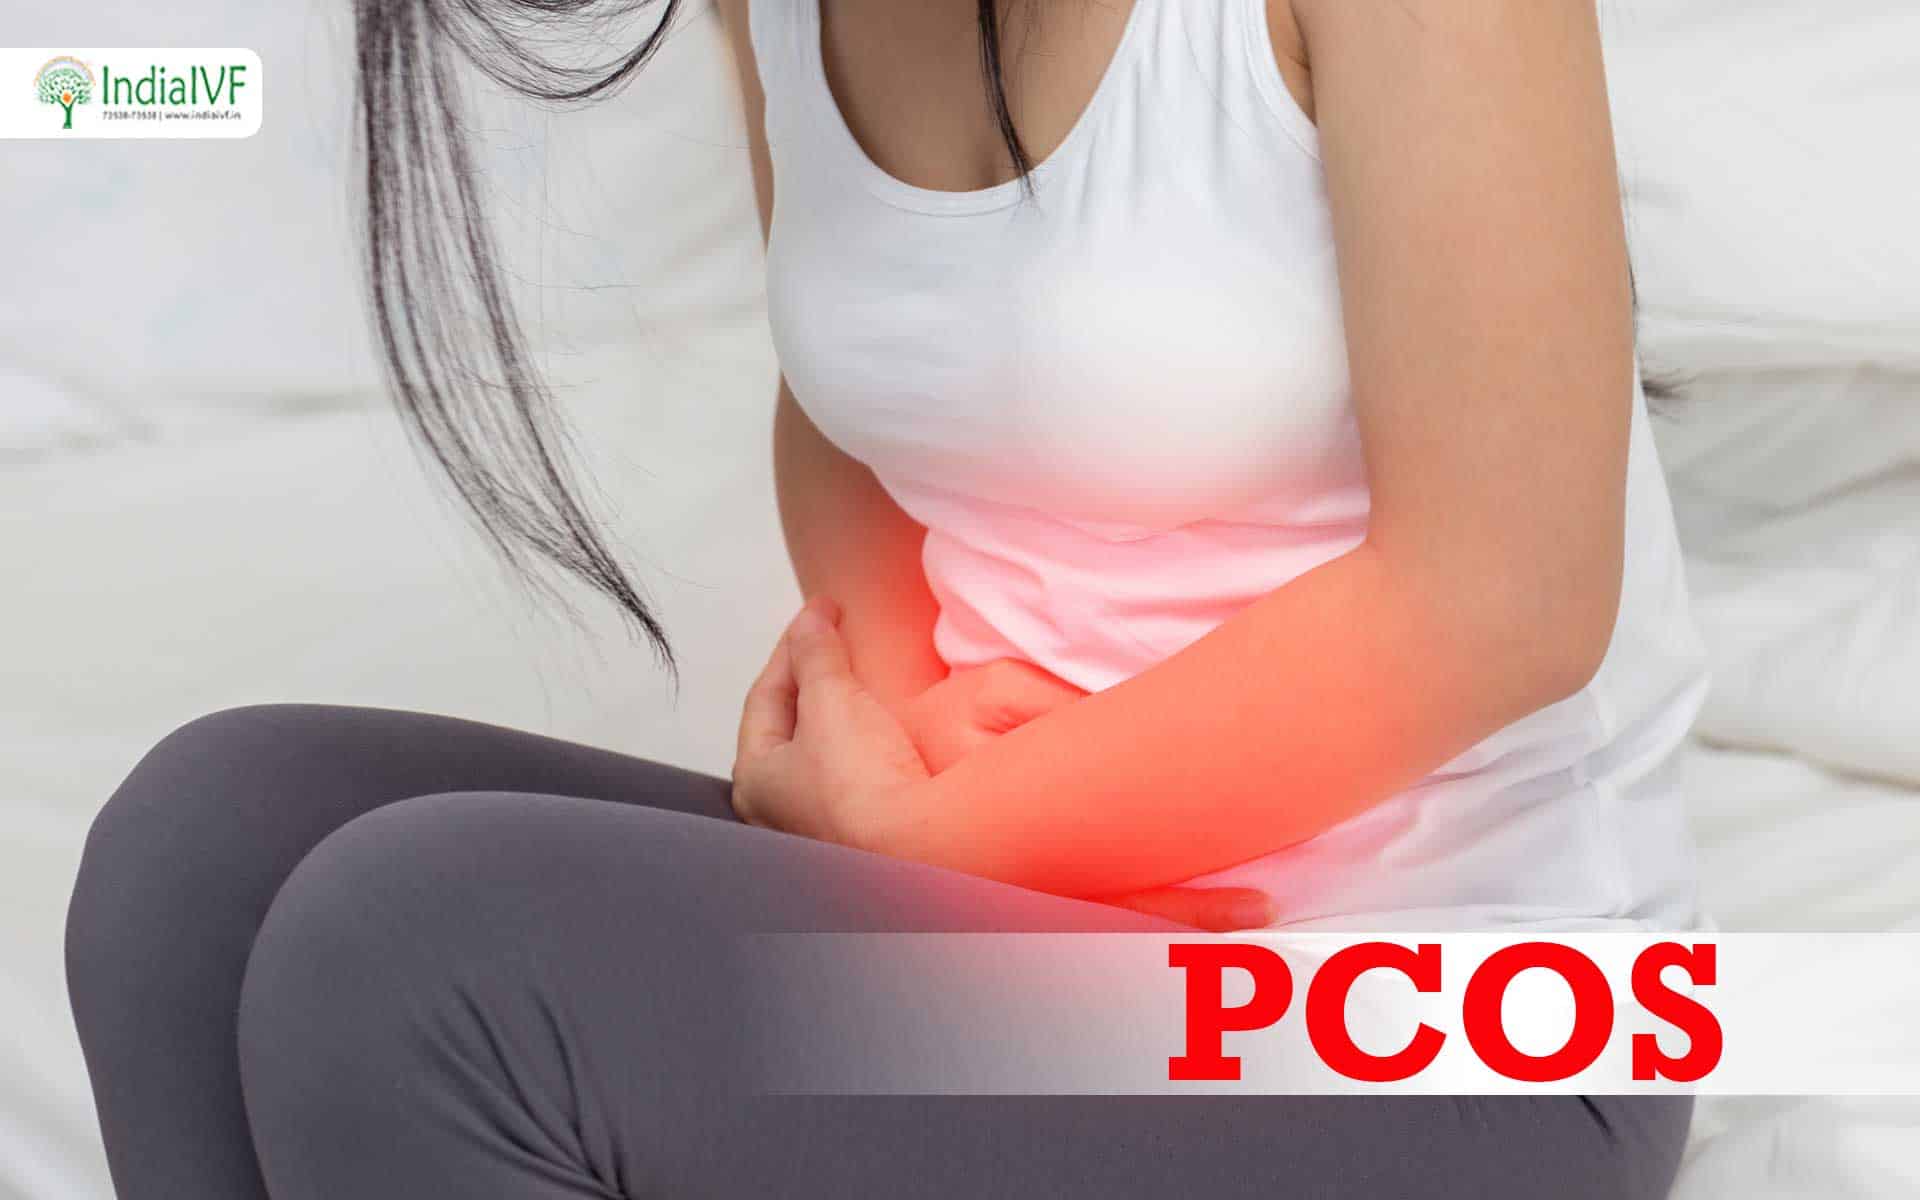 Polycystic Ovary Syndrome (PCOS): Treatment, Symptoms & Causes